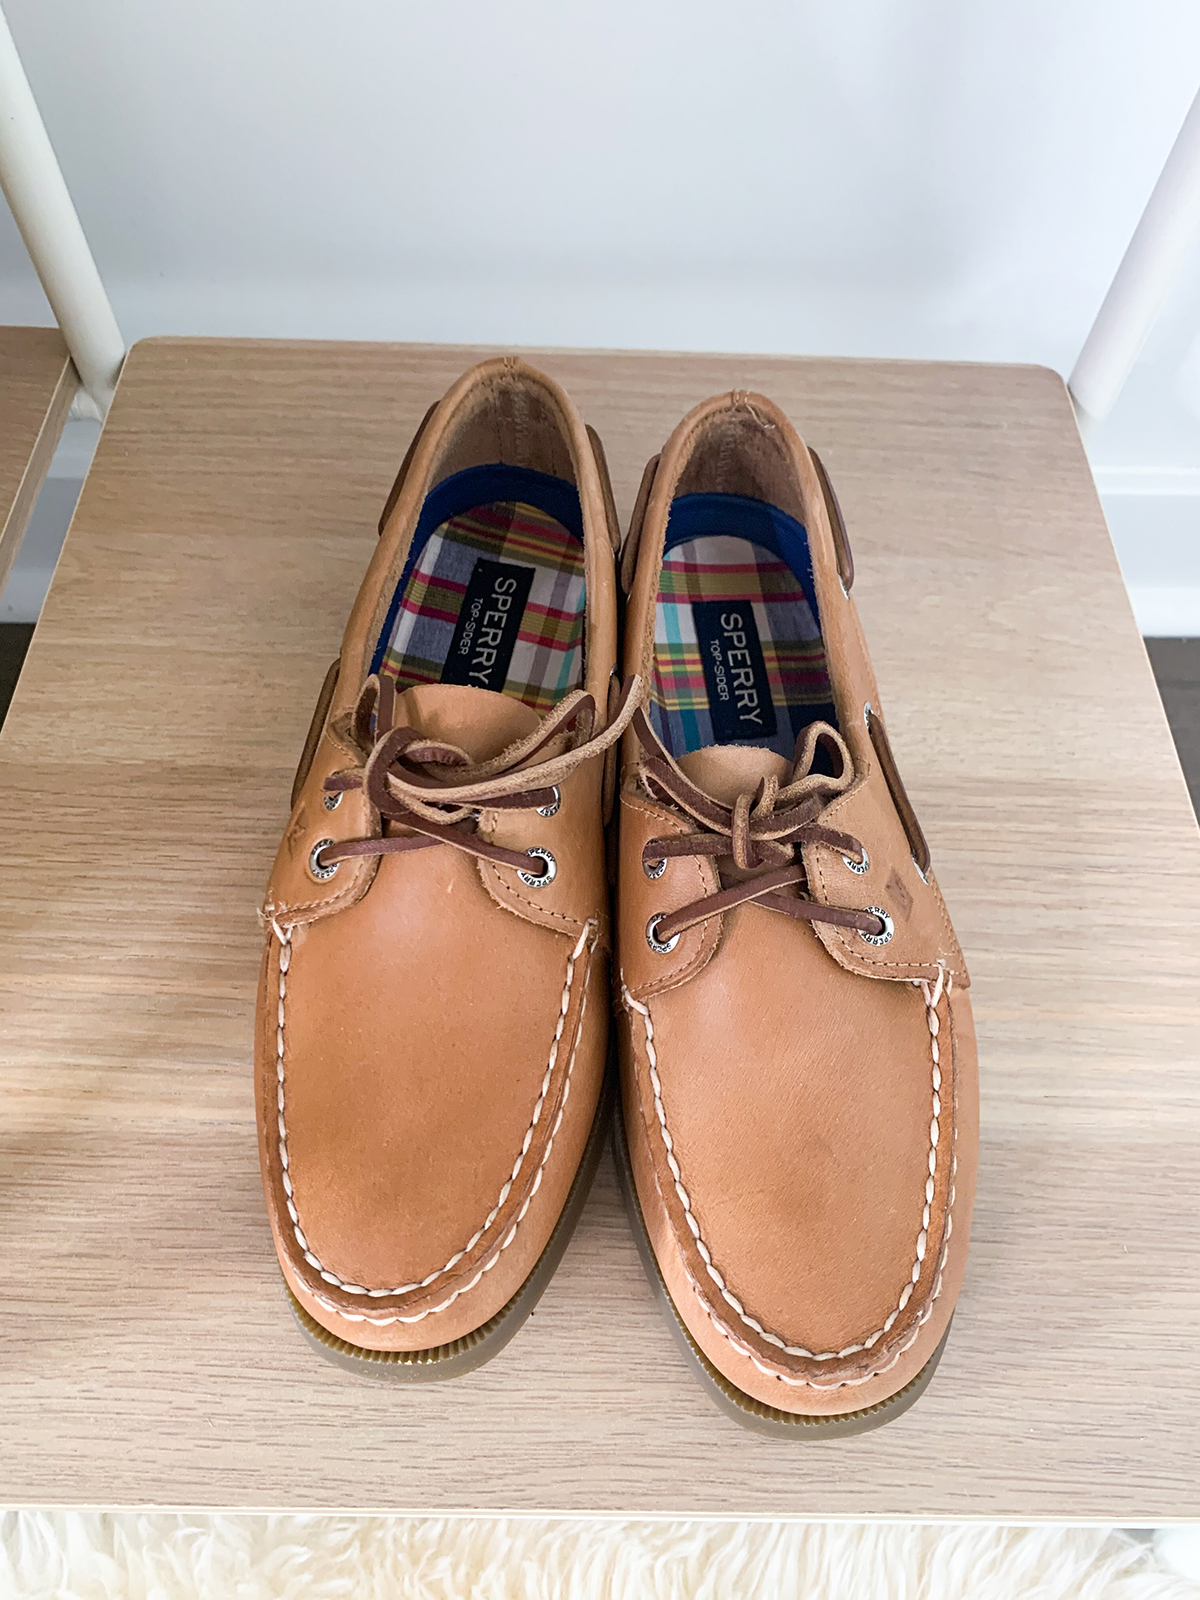 3 Ways To Wear Sperry Boat Shoes 